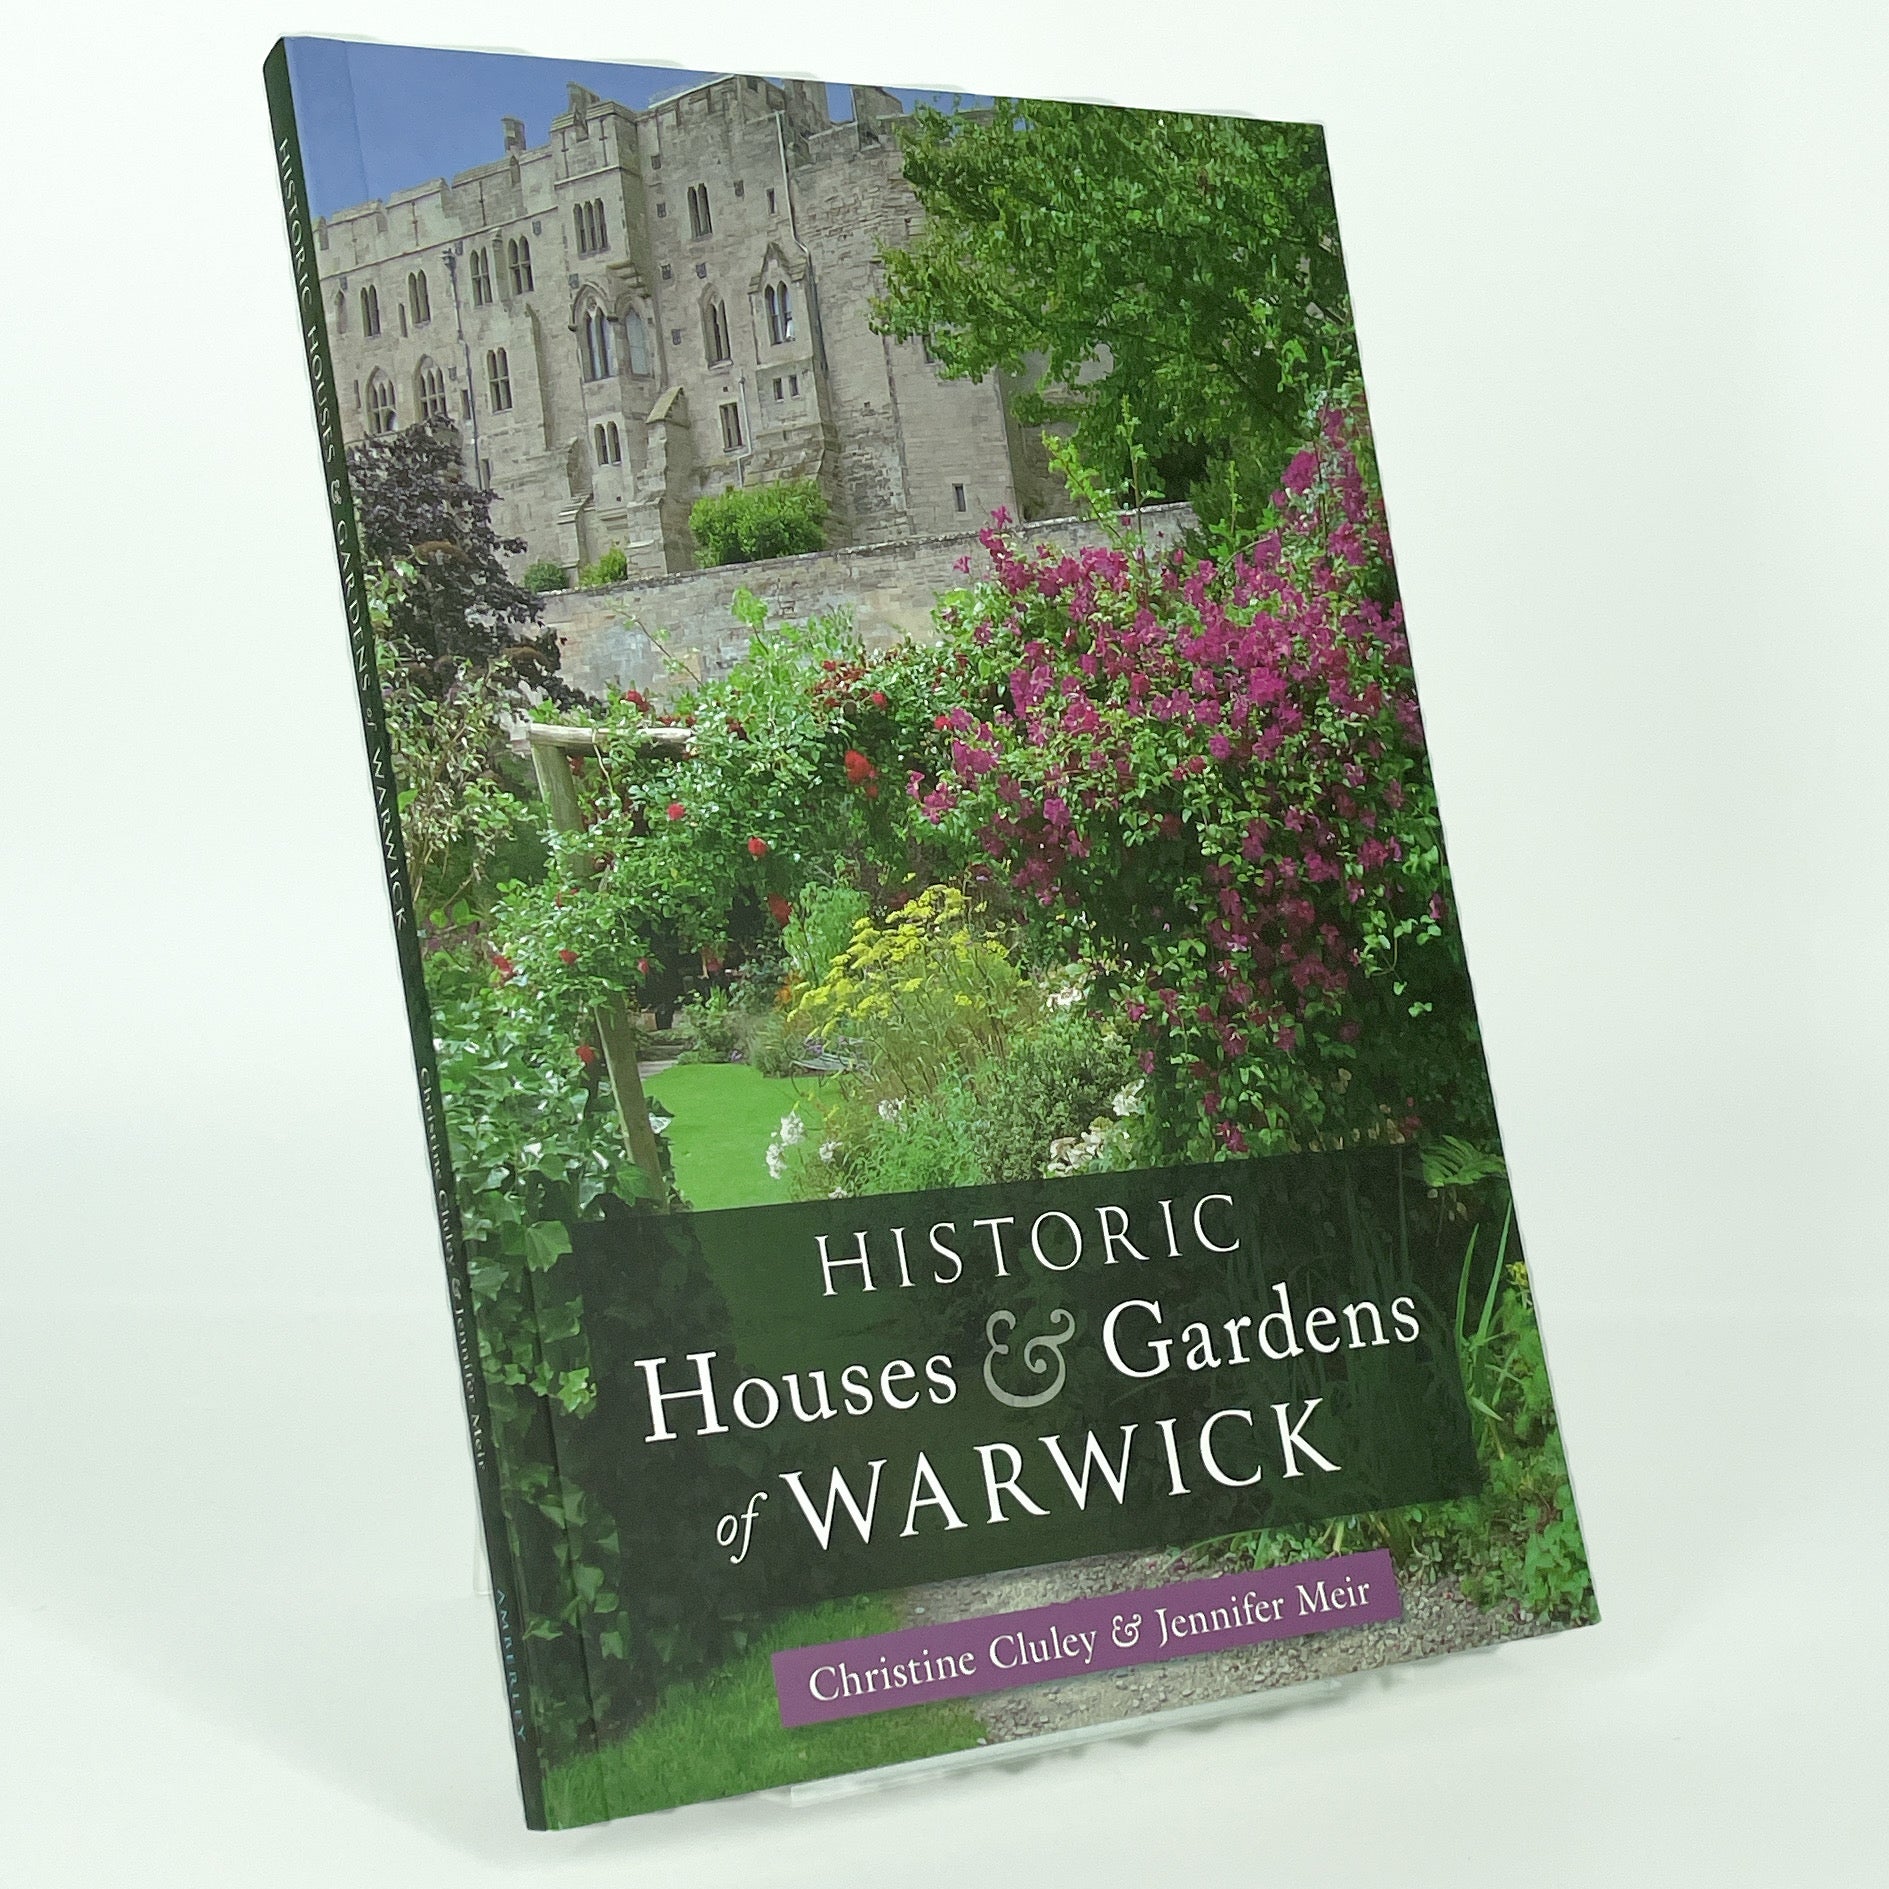 Historic Houses & Gardens of Warwick by Christne Cluley and Jennifer Meir